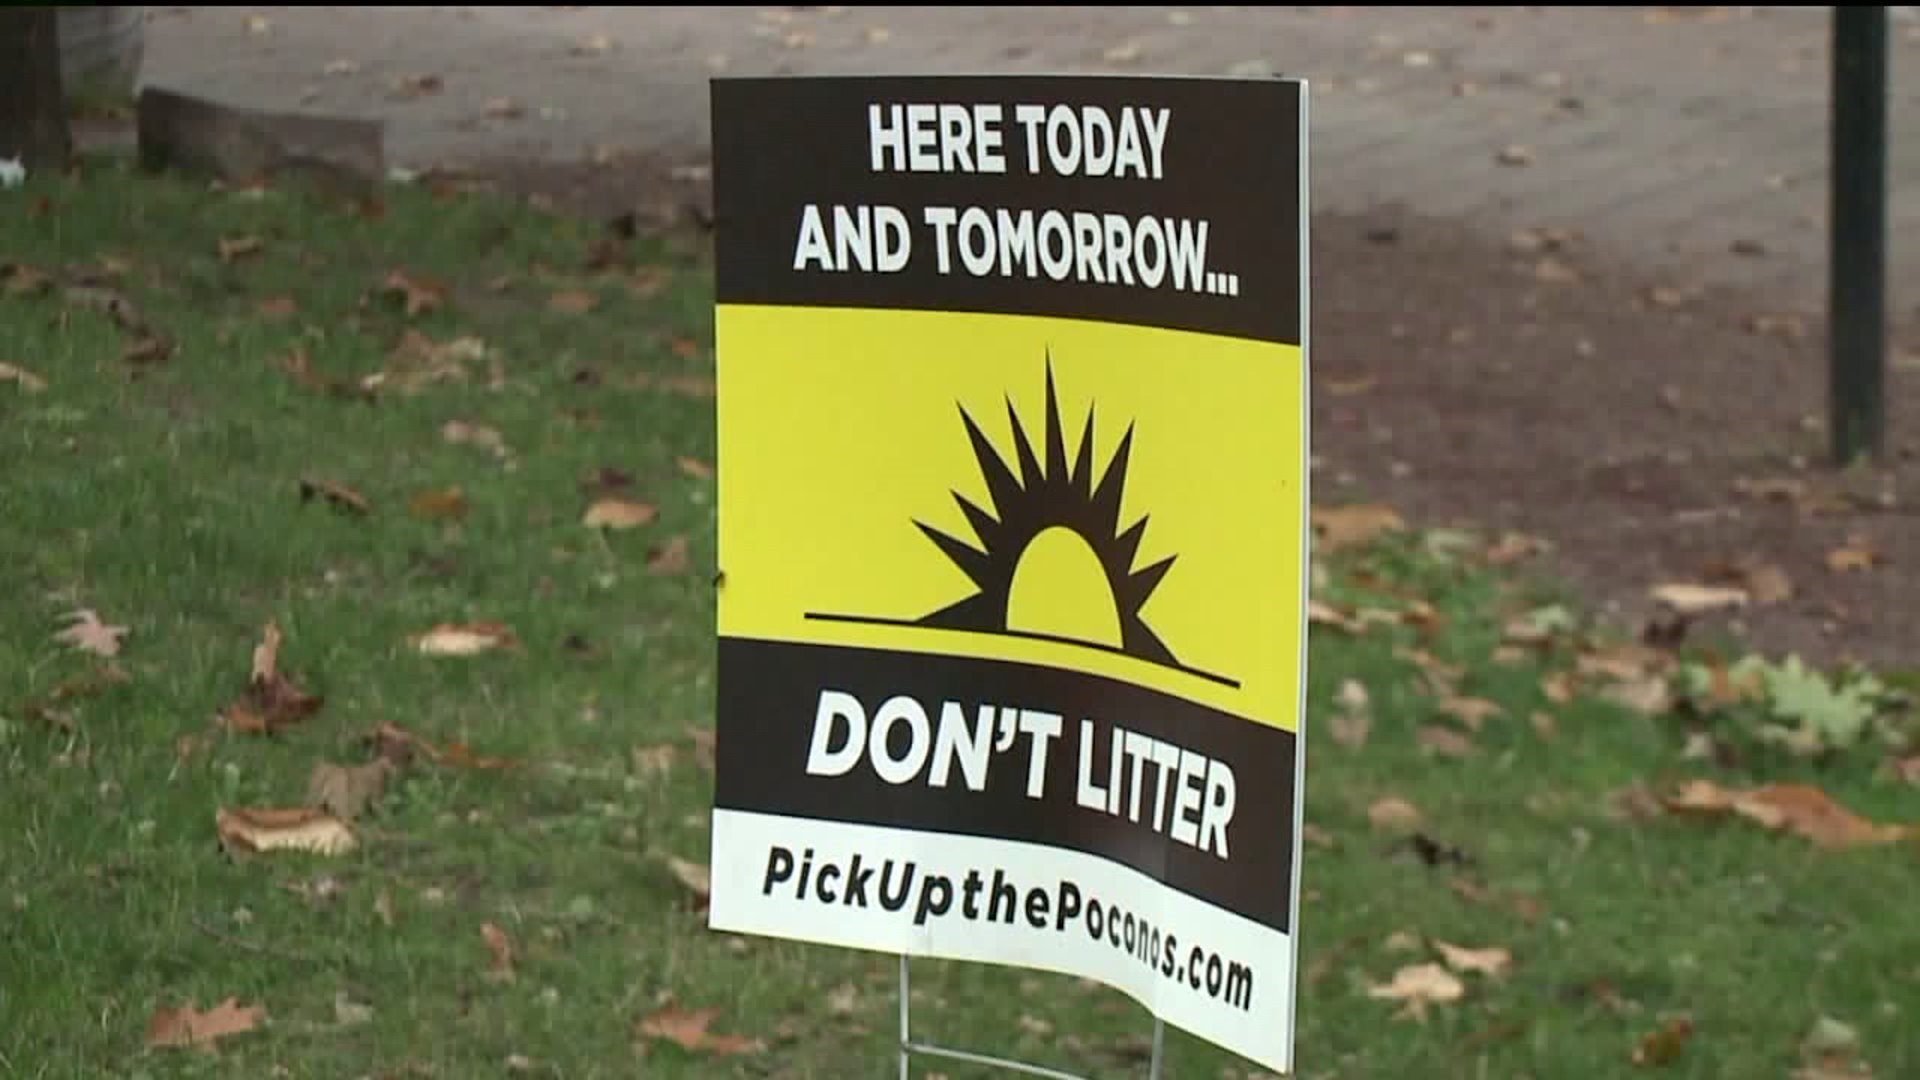 Luzerne County Leaders Meet to Discuss Littering